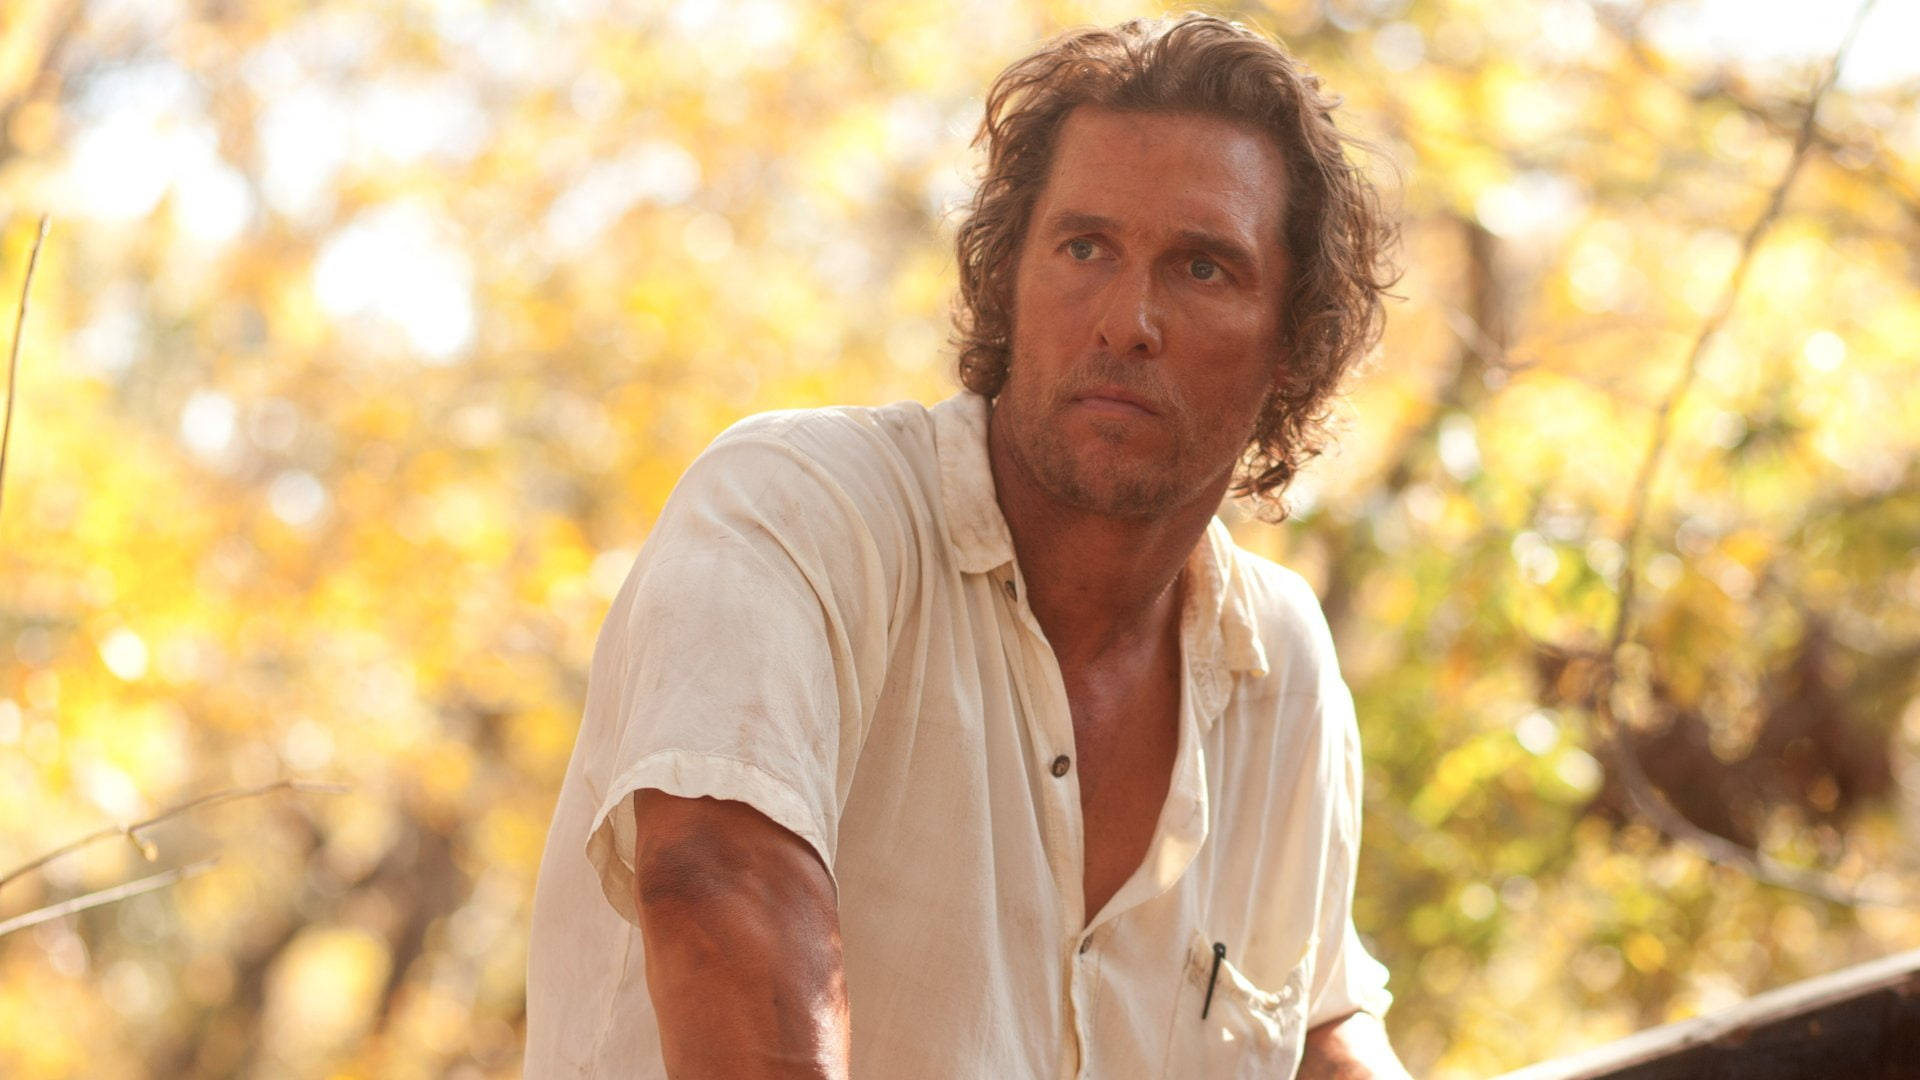 Top 999+ Matthew Mcconaughey Wallpapers Full HD, 4K✅Free to Use